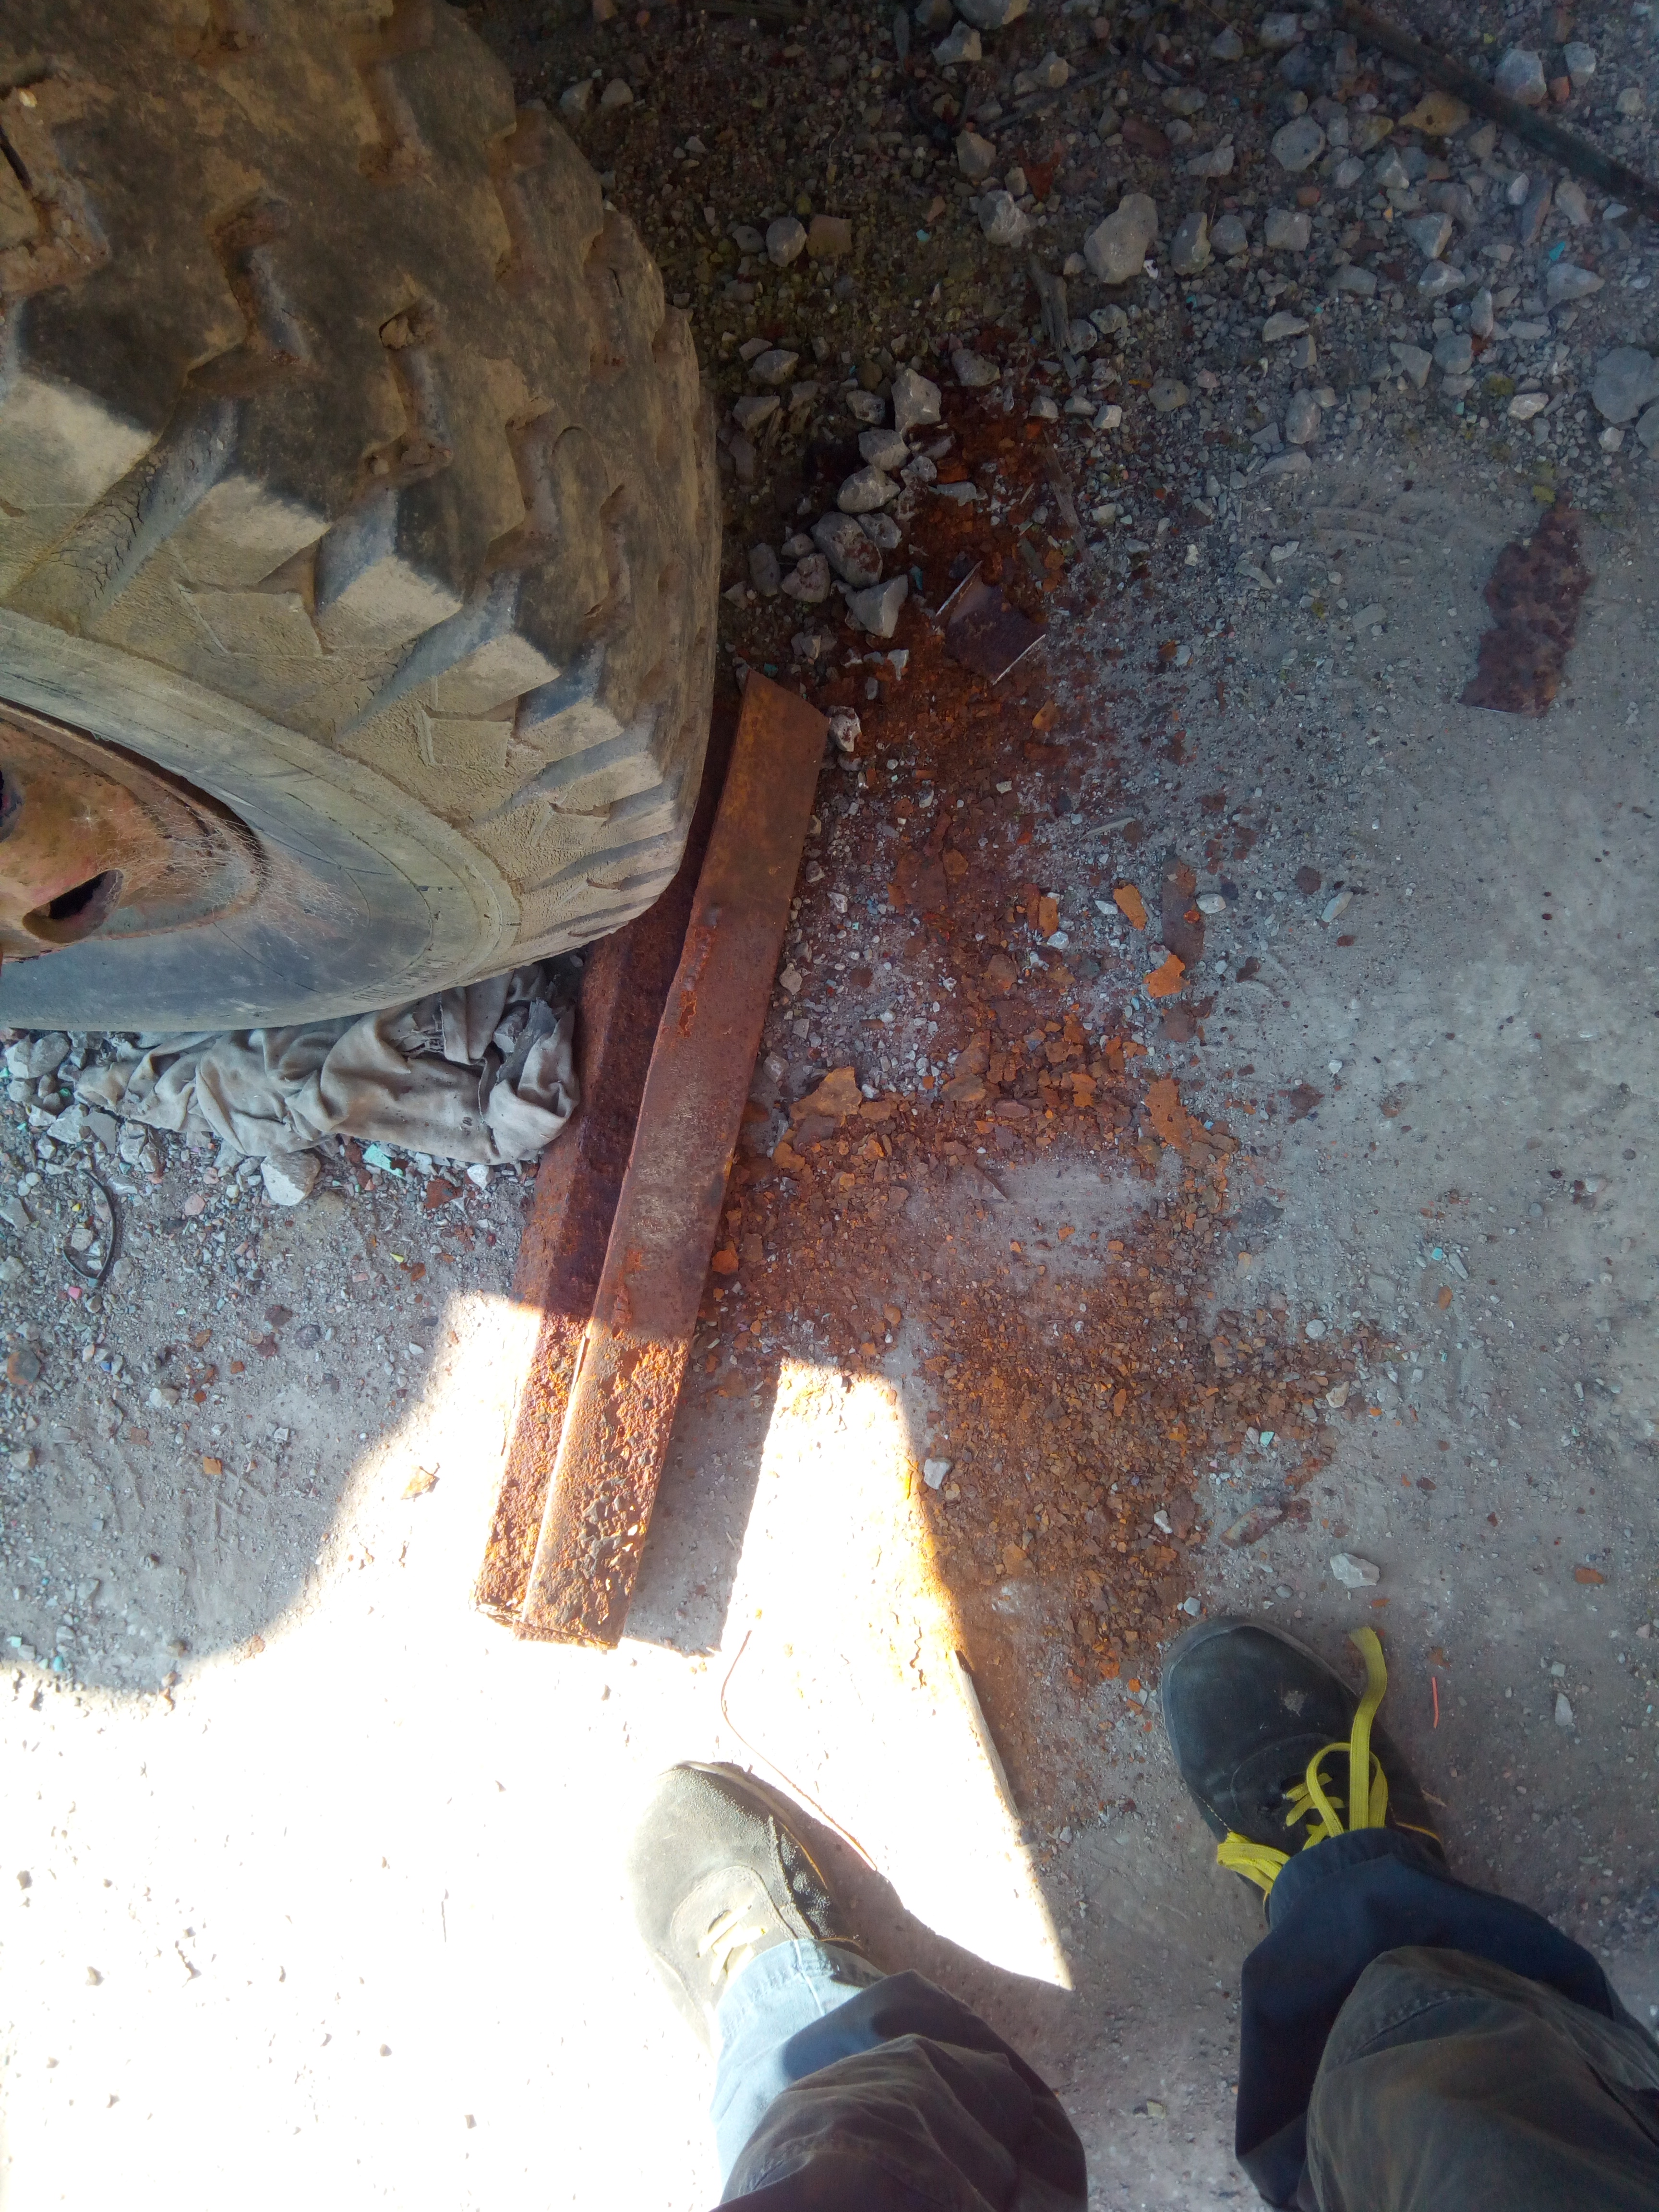 A rotten rust-repair, and a large pile of crumbly rust-flakes, in
a heap on the floor behind the truck's front wheel.